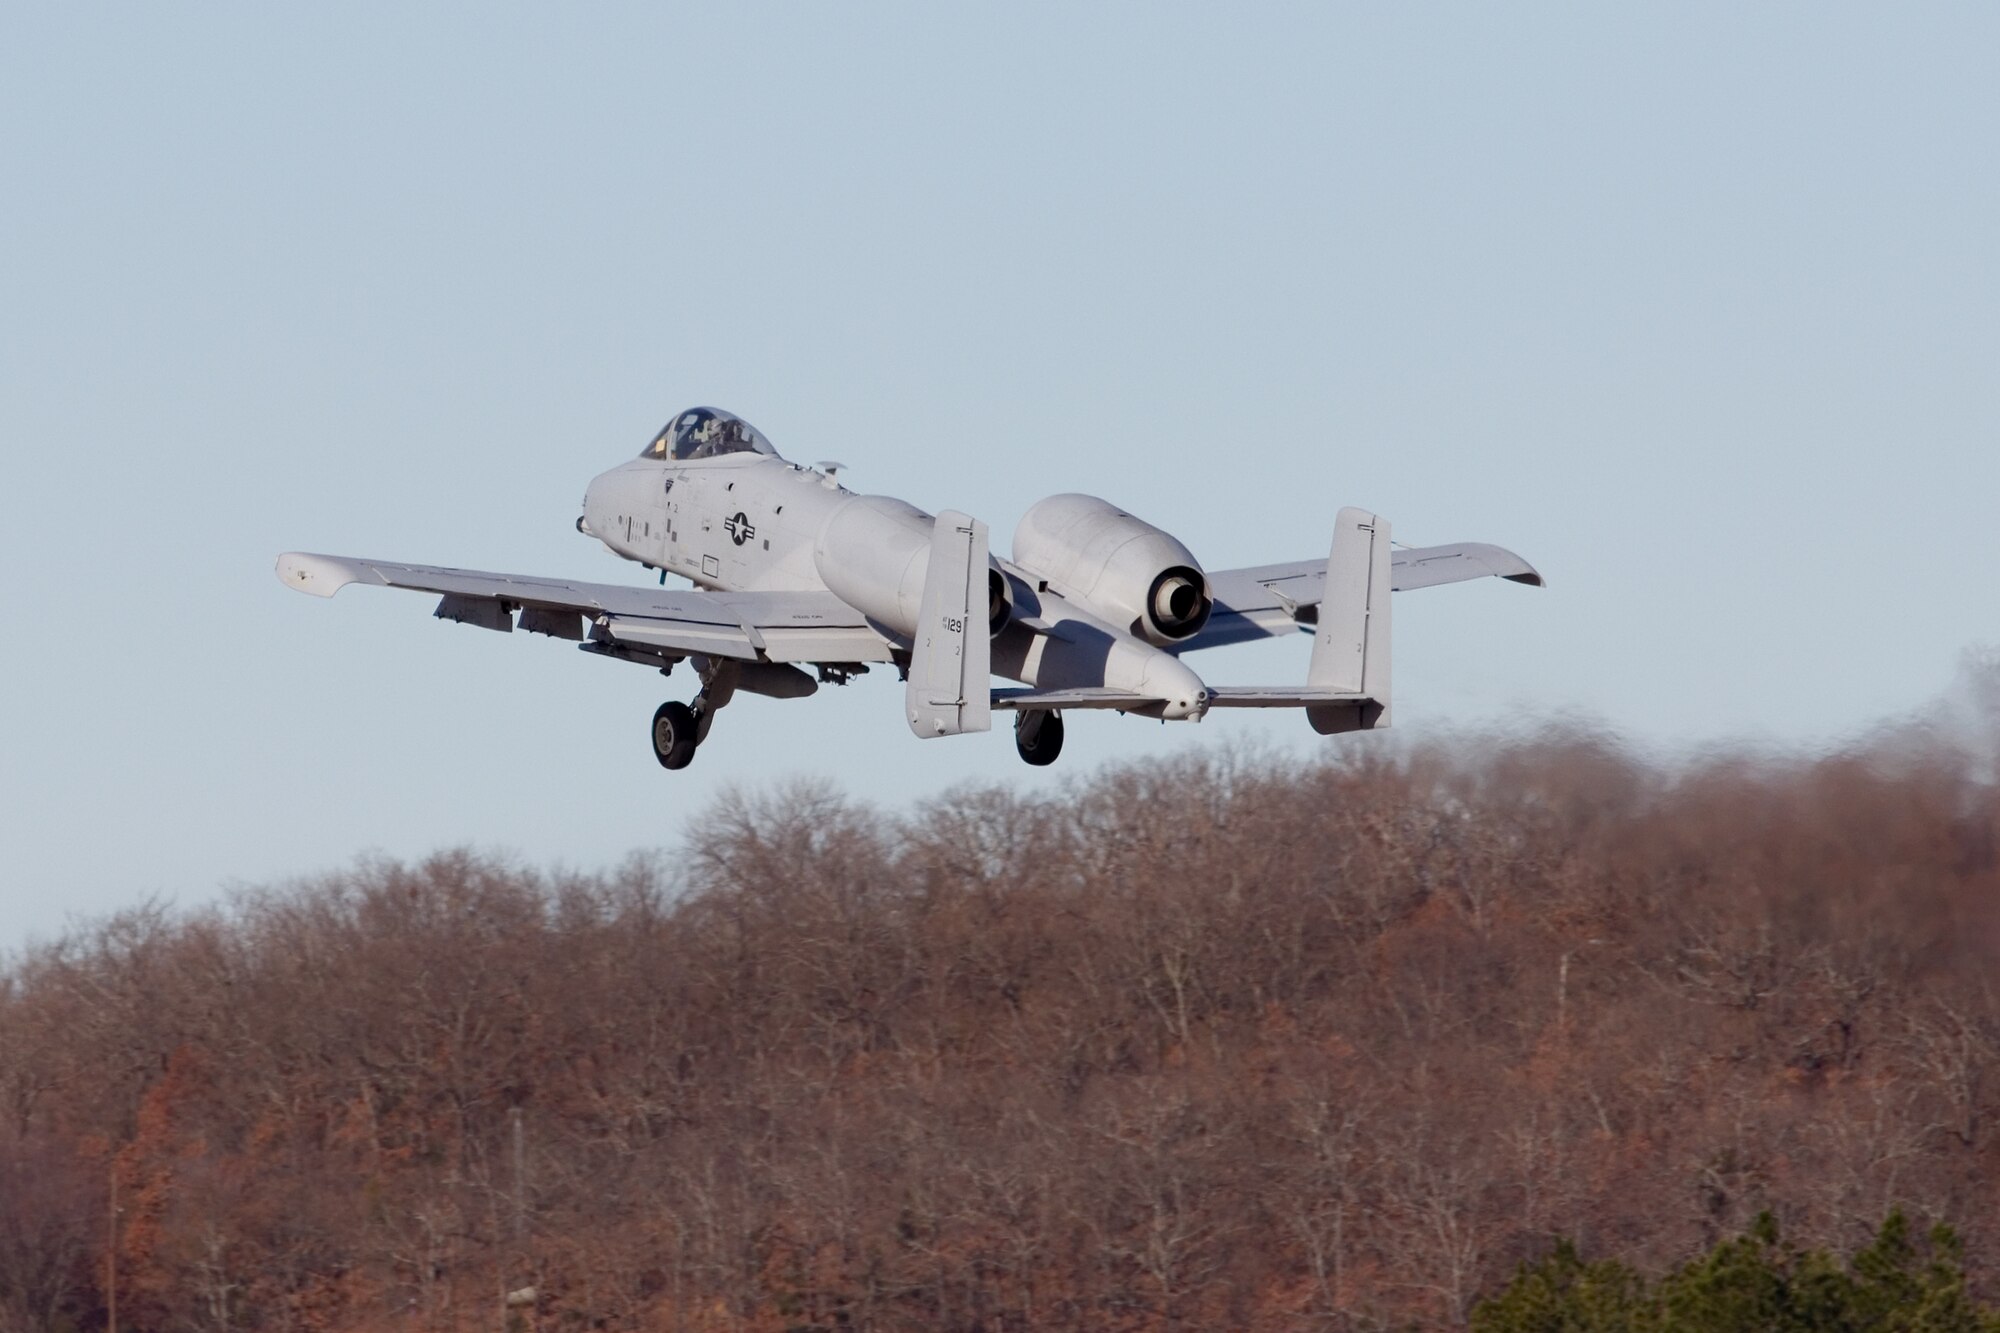 An A-10C Thunderbolt II "Warthog" (Tail No. 0129) takes off from the 188th Fighter Wing for Moody Air Force Base, Ga., Jan. 15, 2014. Tail Nos. 0129 and 0647 were transferred from the 188th’s Ebbing Air National Guard Base, Fort Smith, Ark., as part of the wing’s on-going conversion from a fighter mission to remotely piloted aircraft and Intelligence mission, which will include a space-focused targeting squadron. The 188th now has nine remaining A-10s left on station. The A-10s will join Moody AFB’s 75th Fighter Squadron. (Courtesy photo by Nick Thomas)